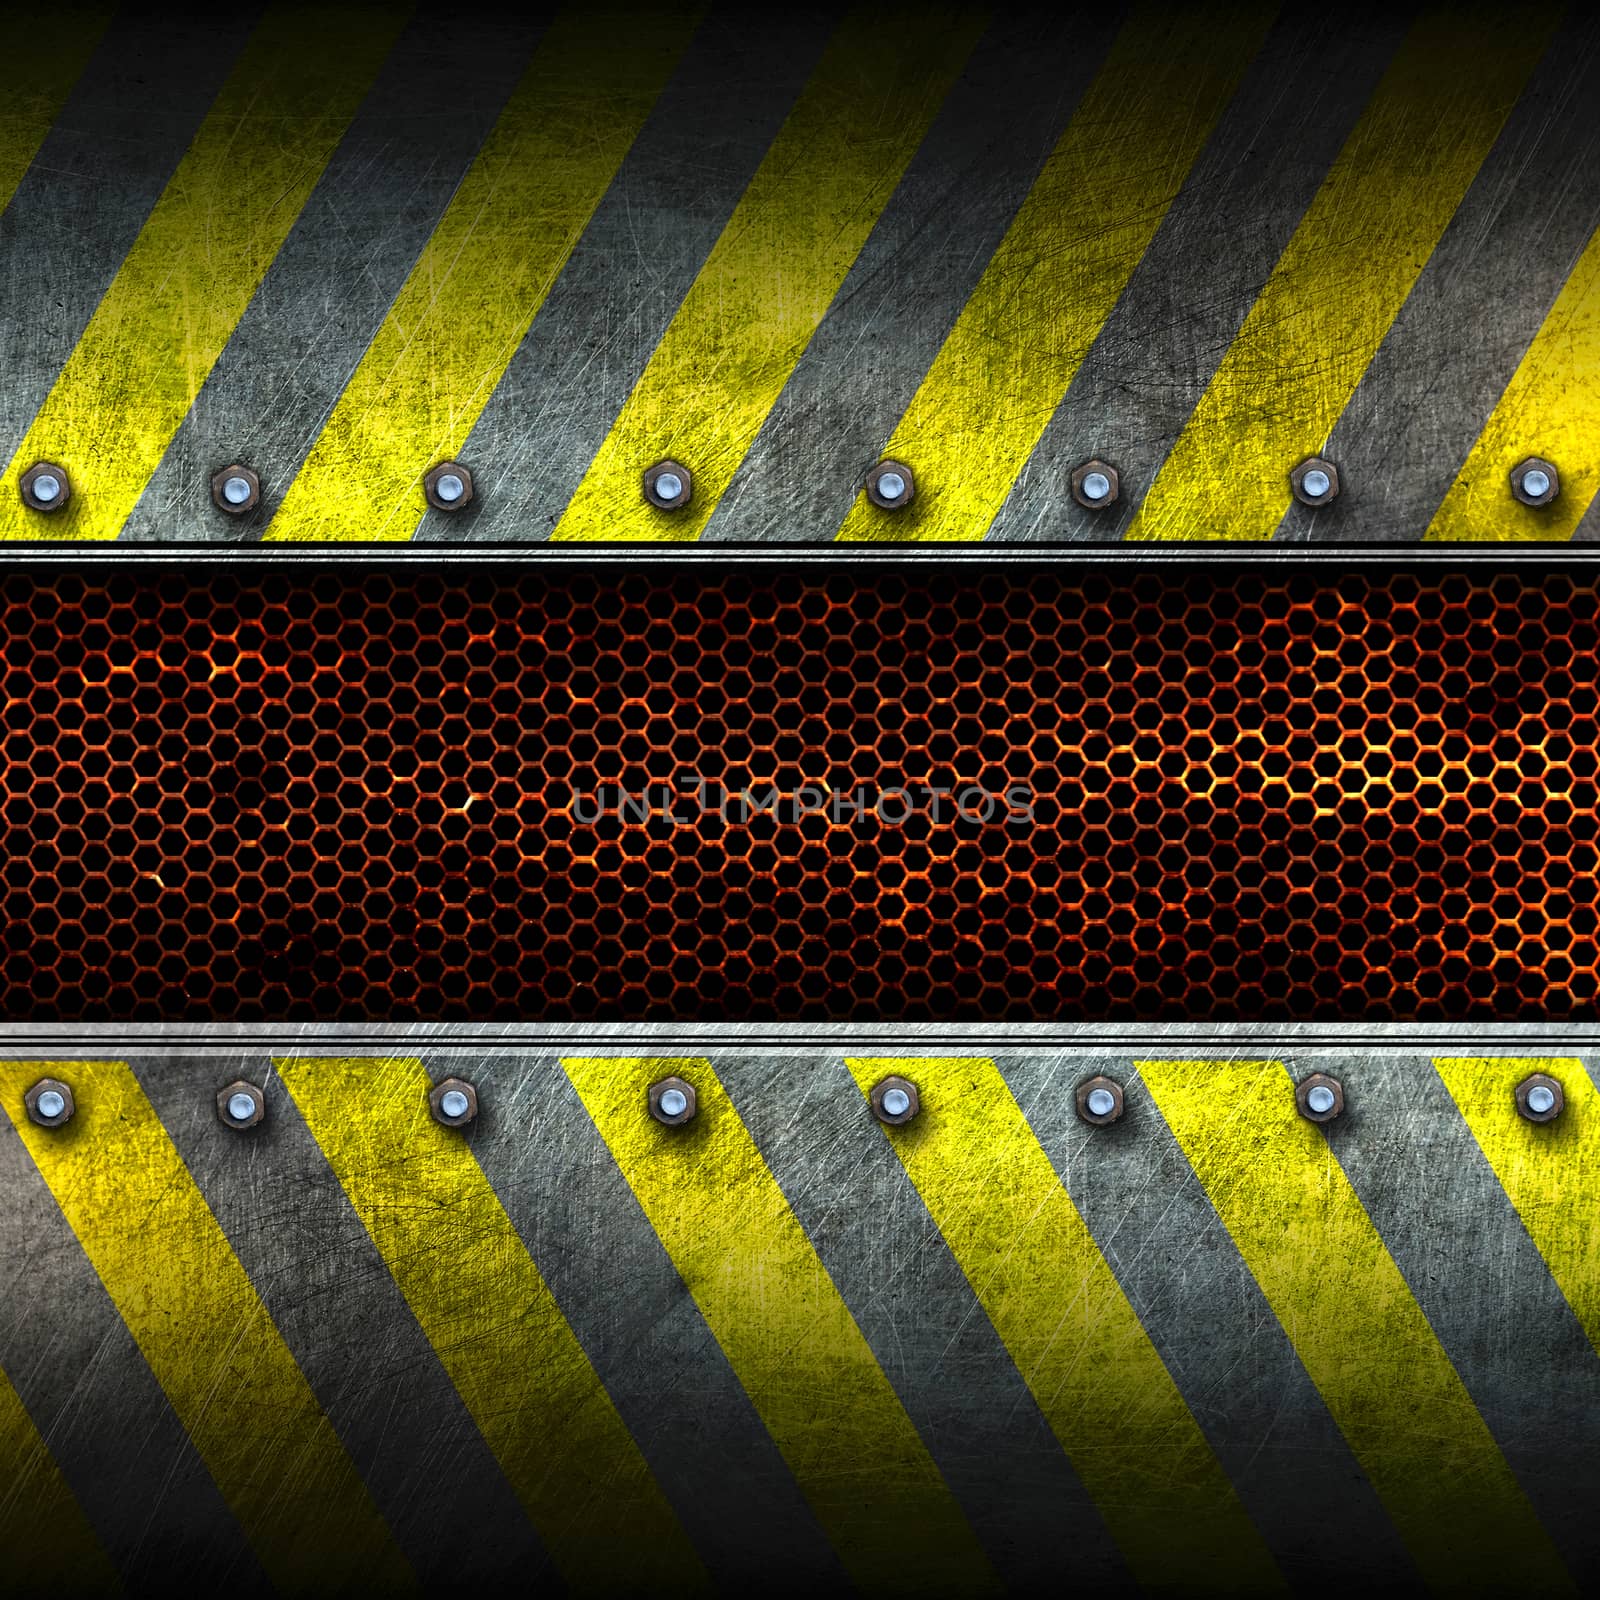 grunge metal and rust mesh with yellow painted. 3d illustration. background and texture.